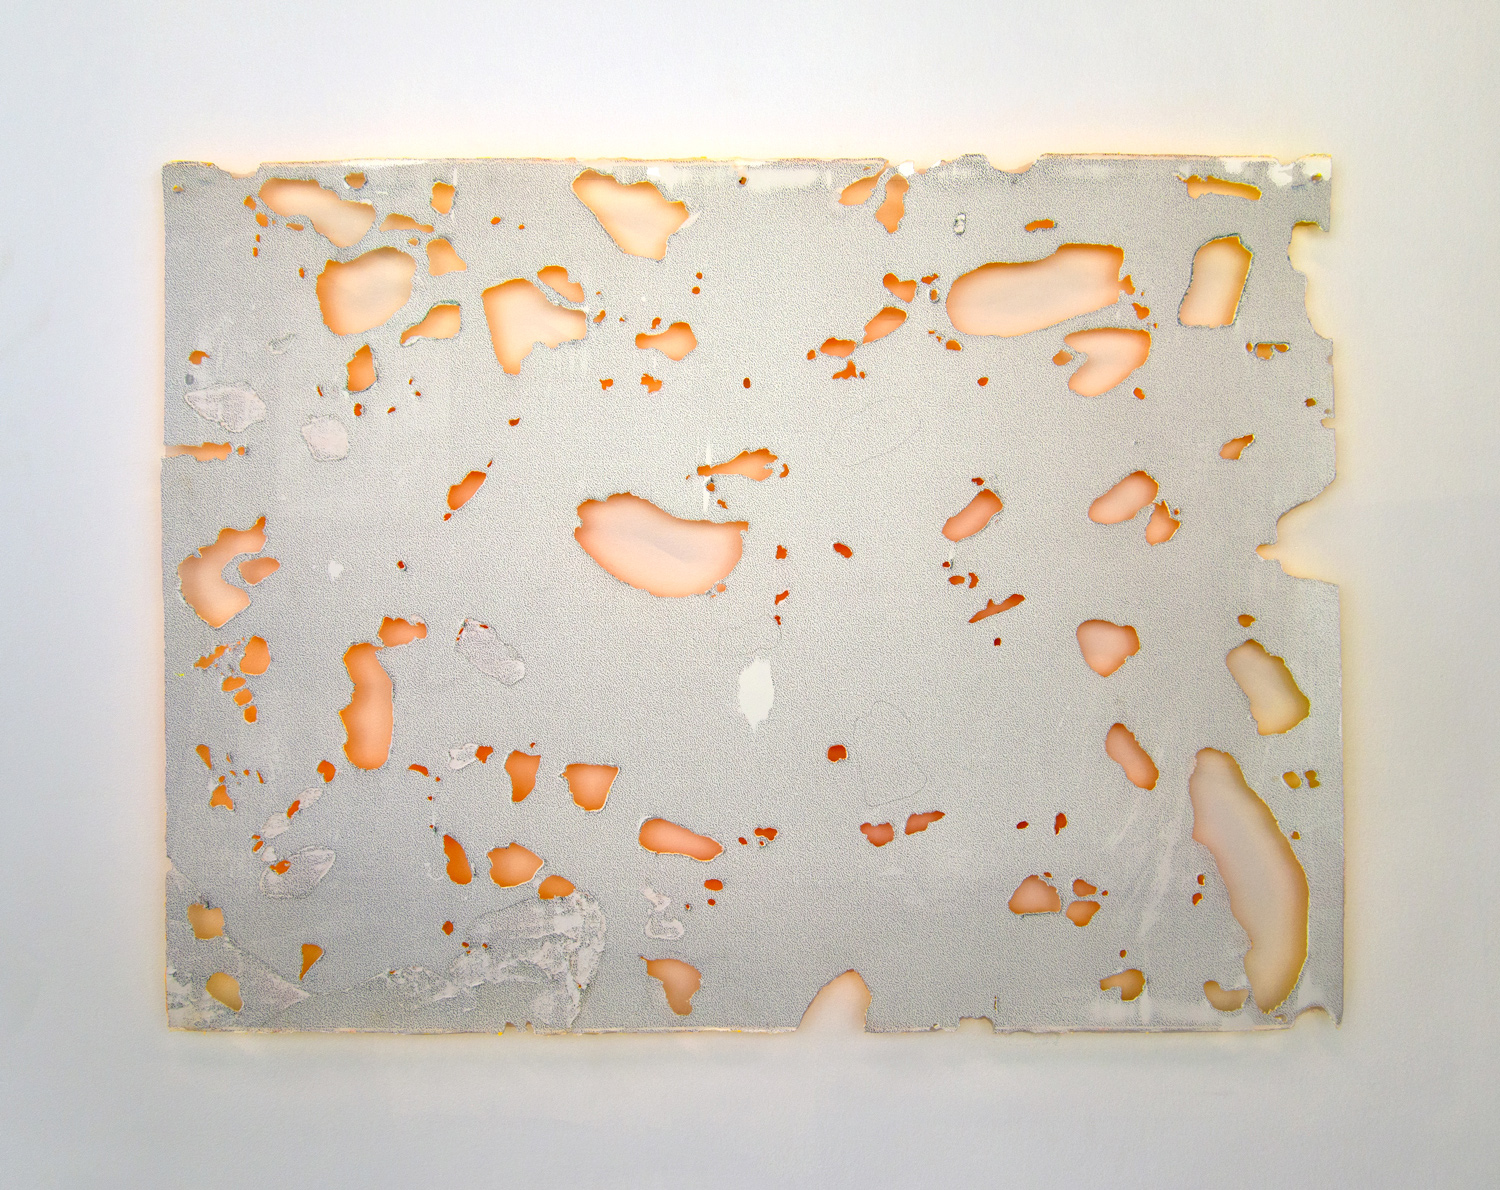 A rectangular piece of paper pierced by many irregular shaped holes floats in front of a white wall.